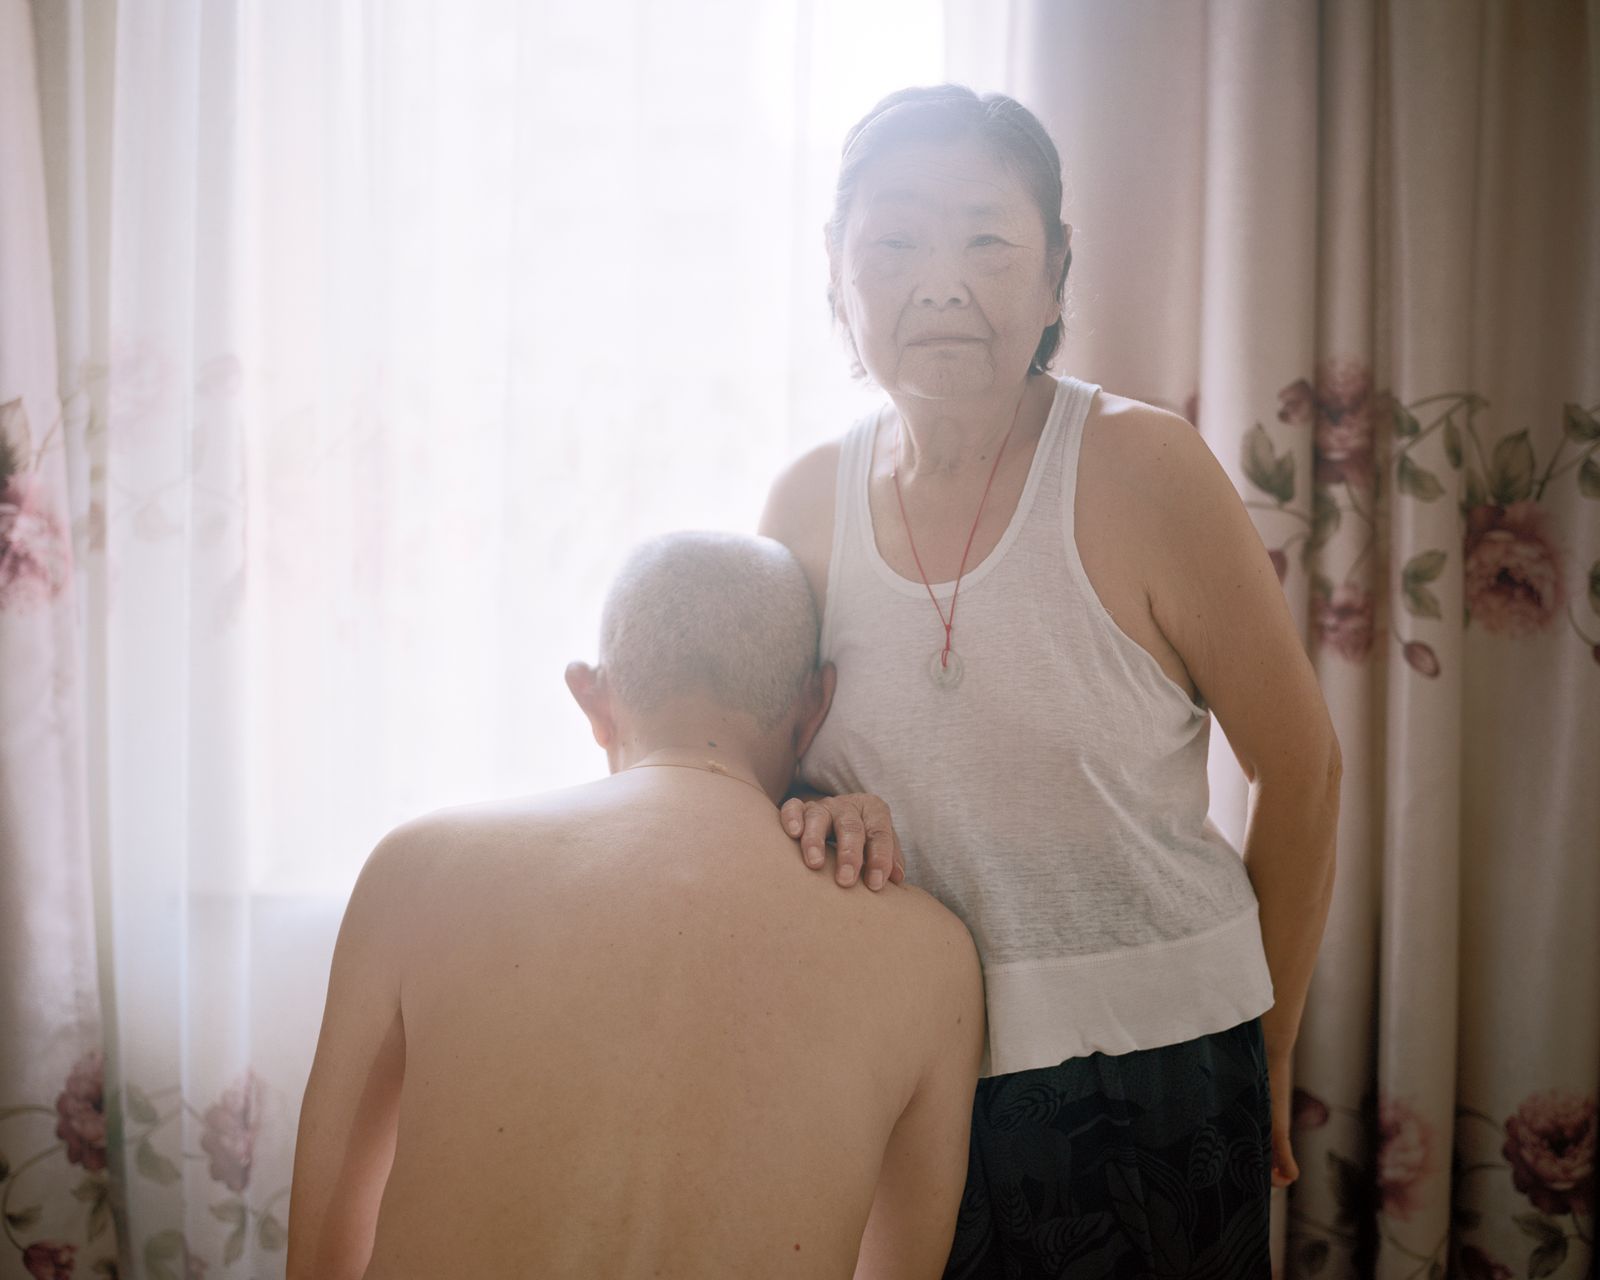 © Jiajun Wang - Image from the Raised by Water photography project